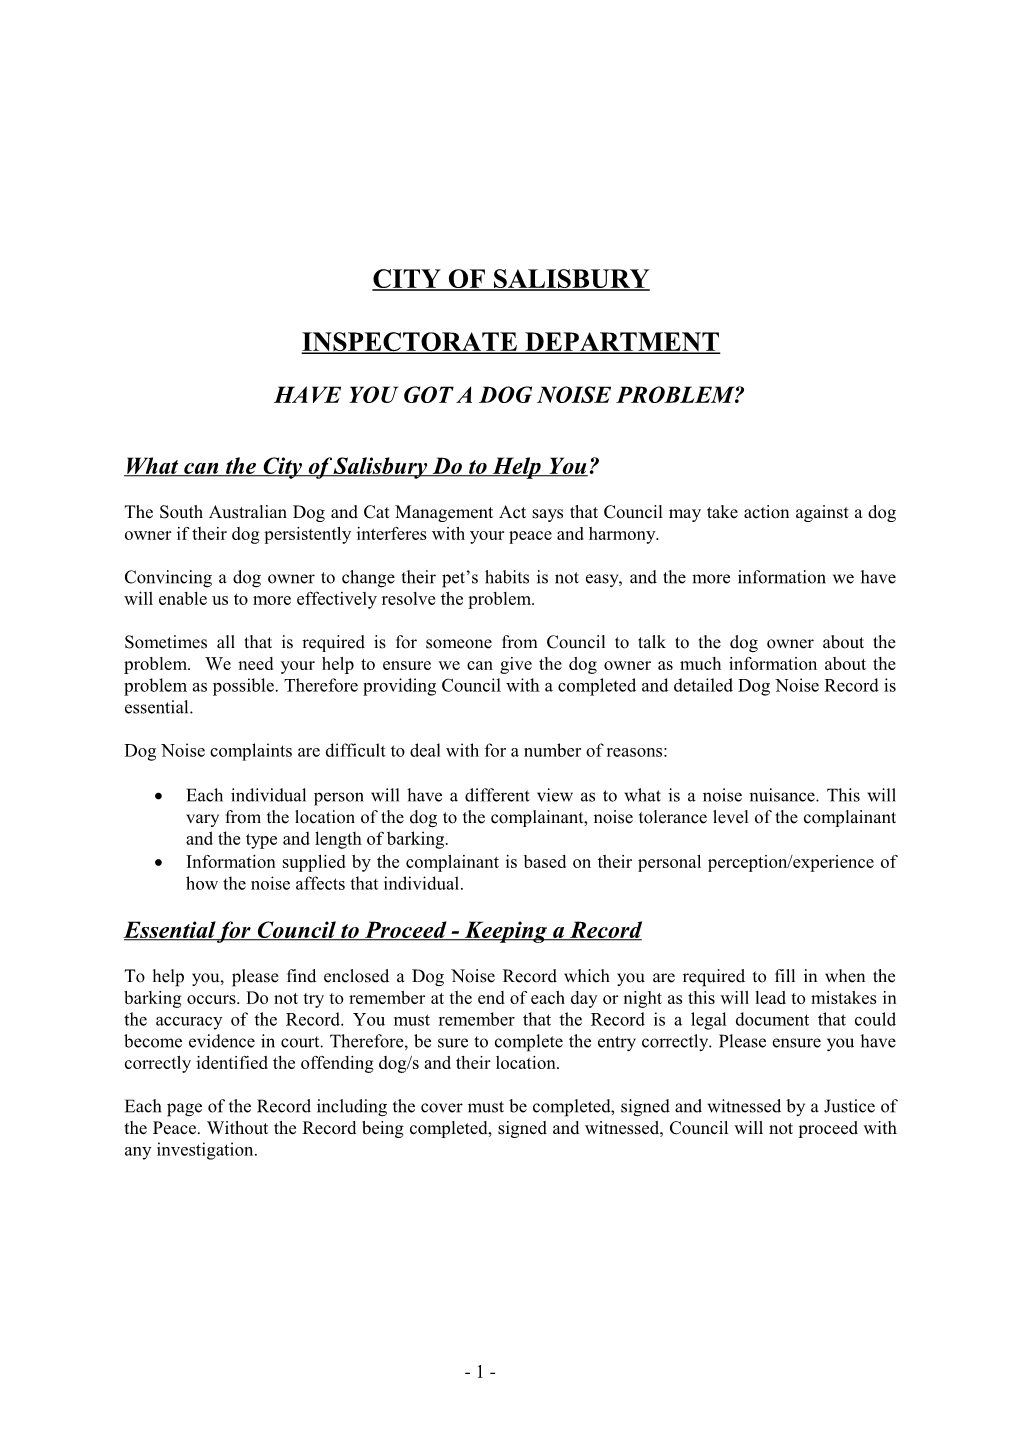 What Can the City of Salisbury Do to Help You?